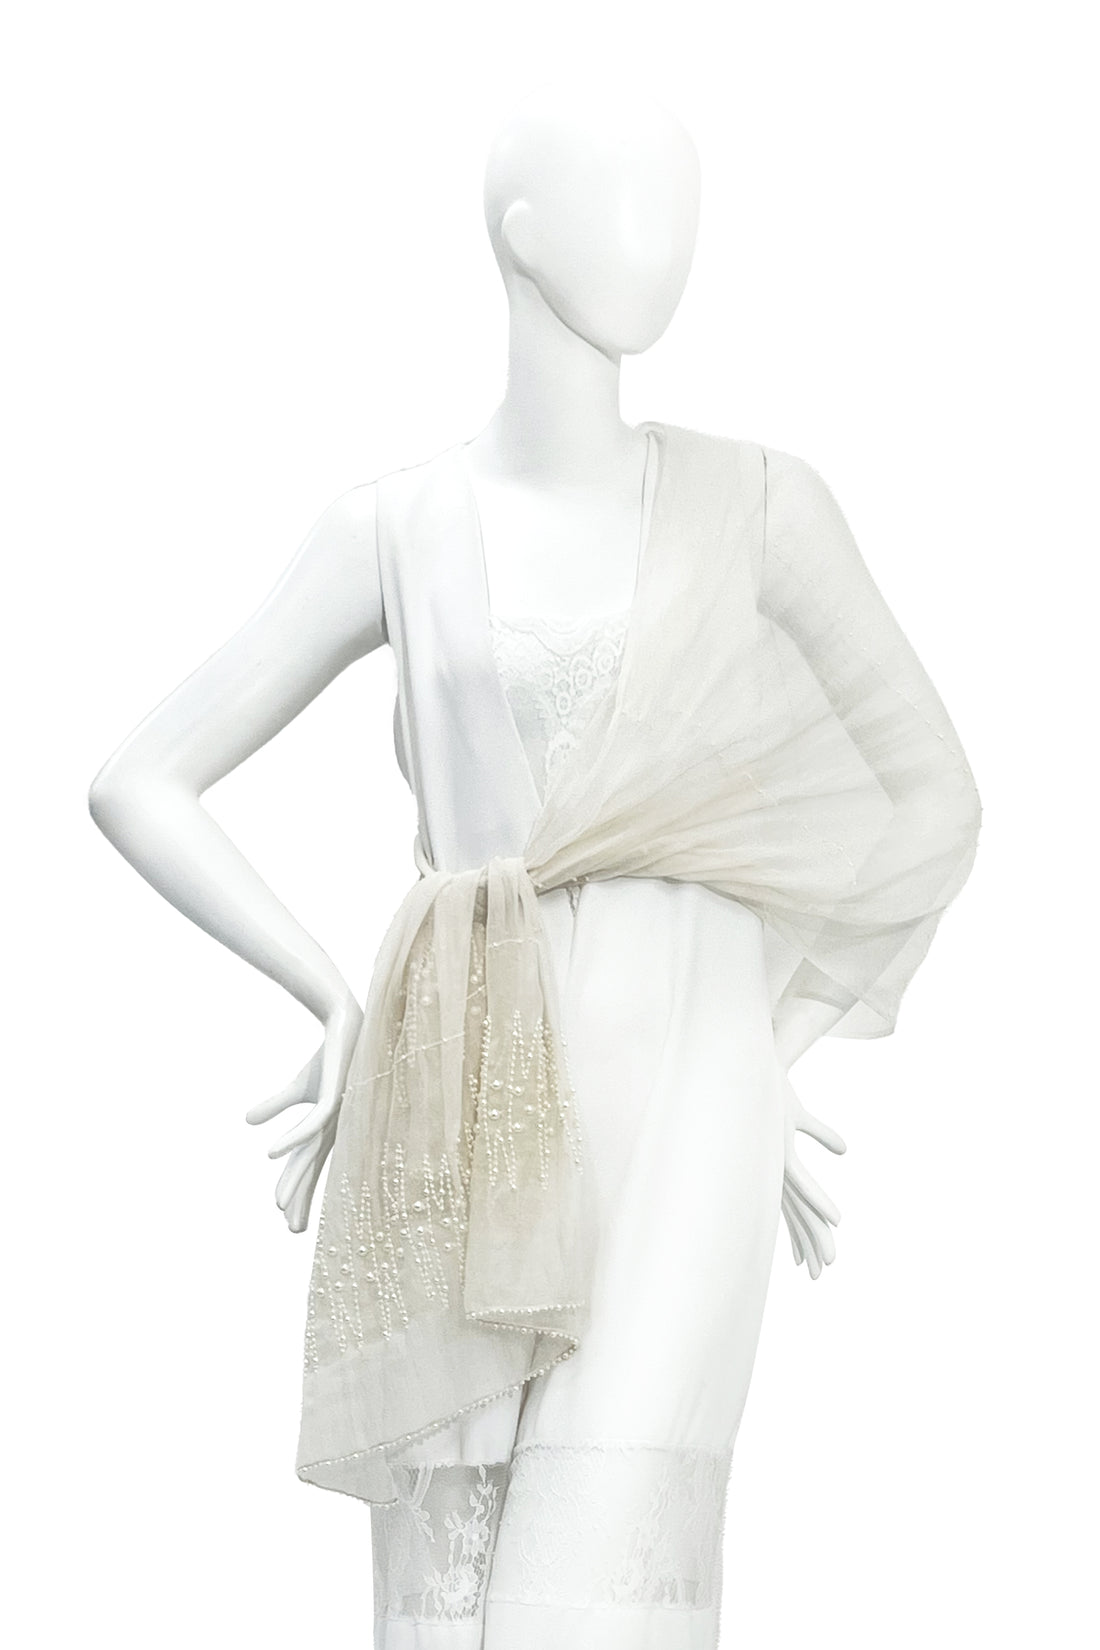  CHIE IMAI Scarf Collection - Pearl Of India "WHITE"